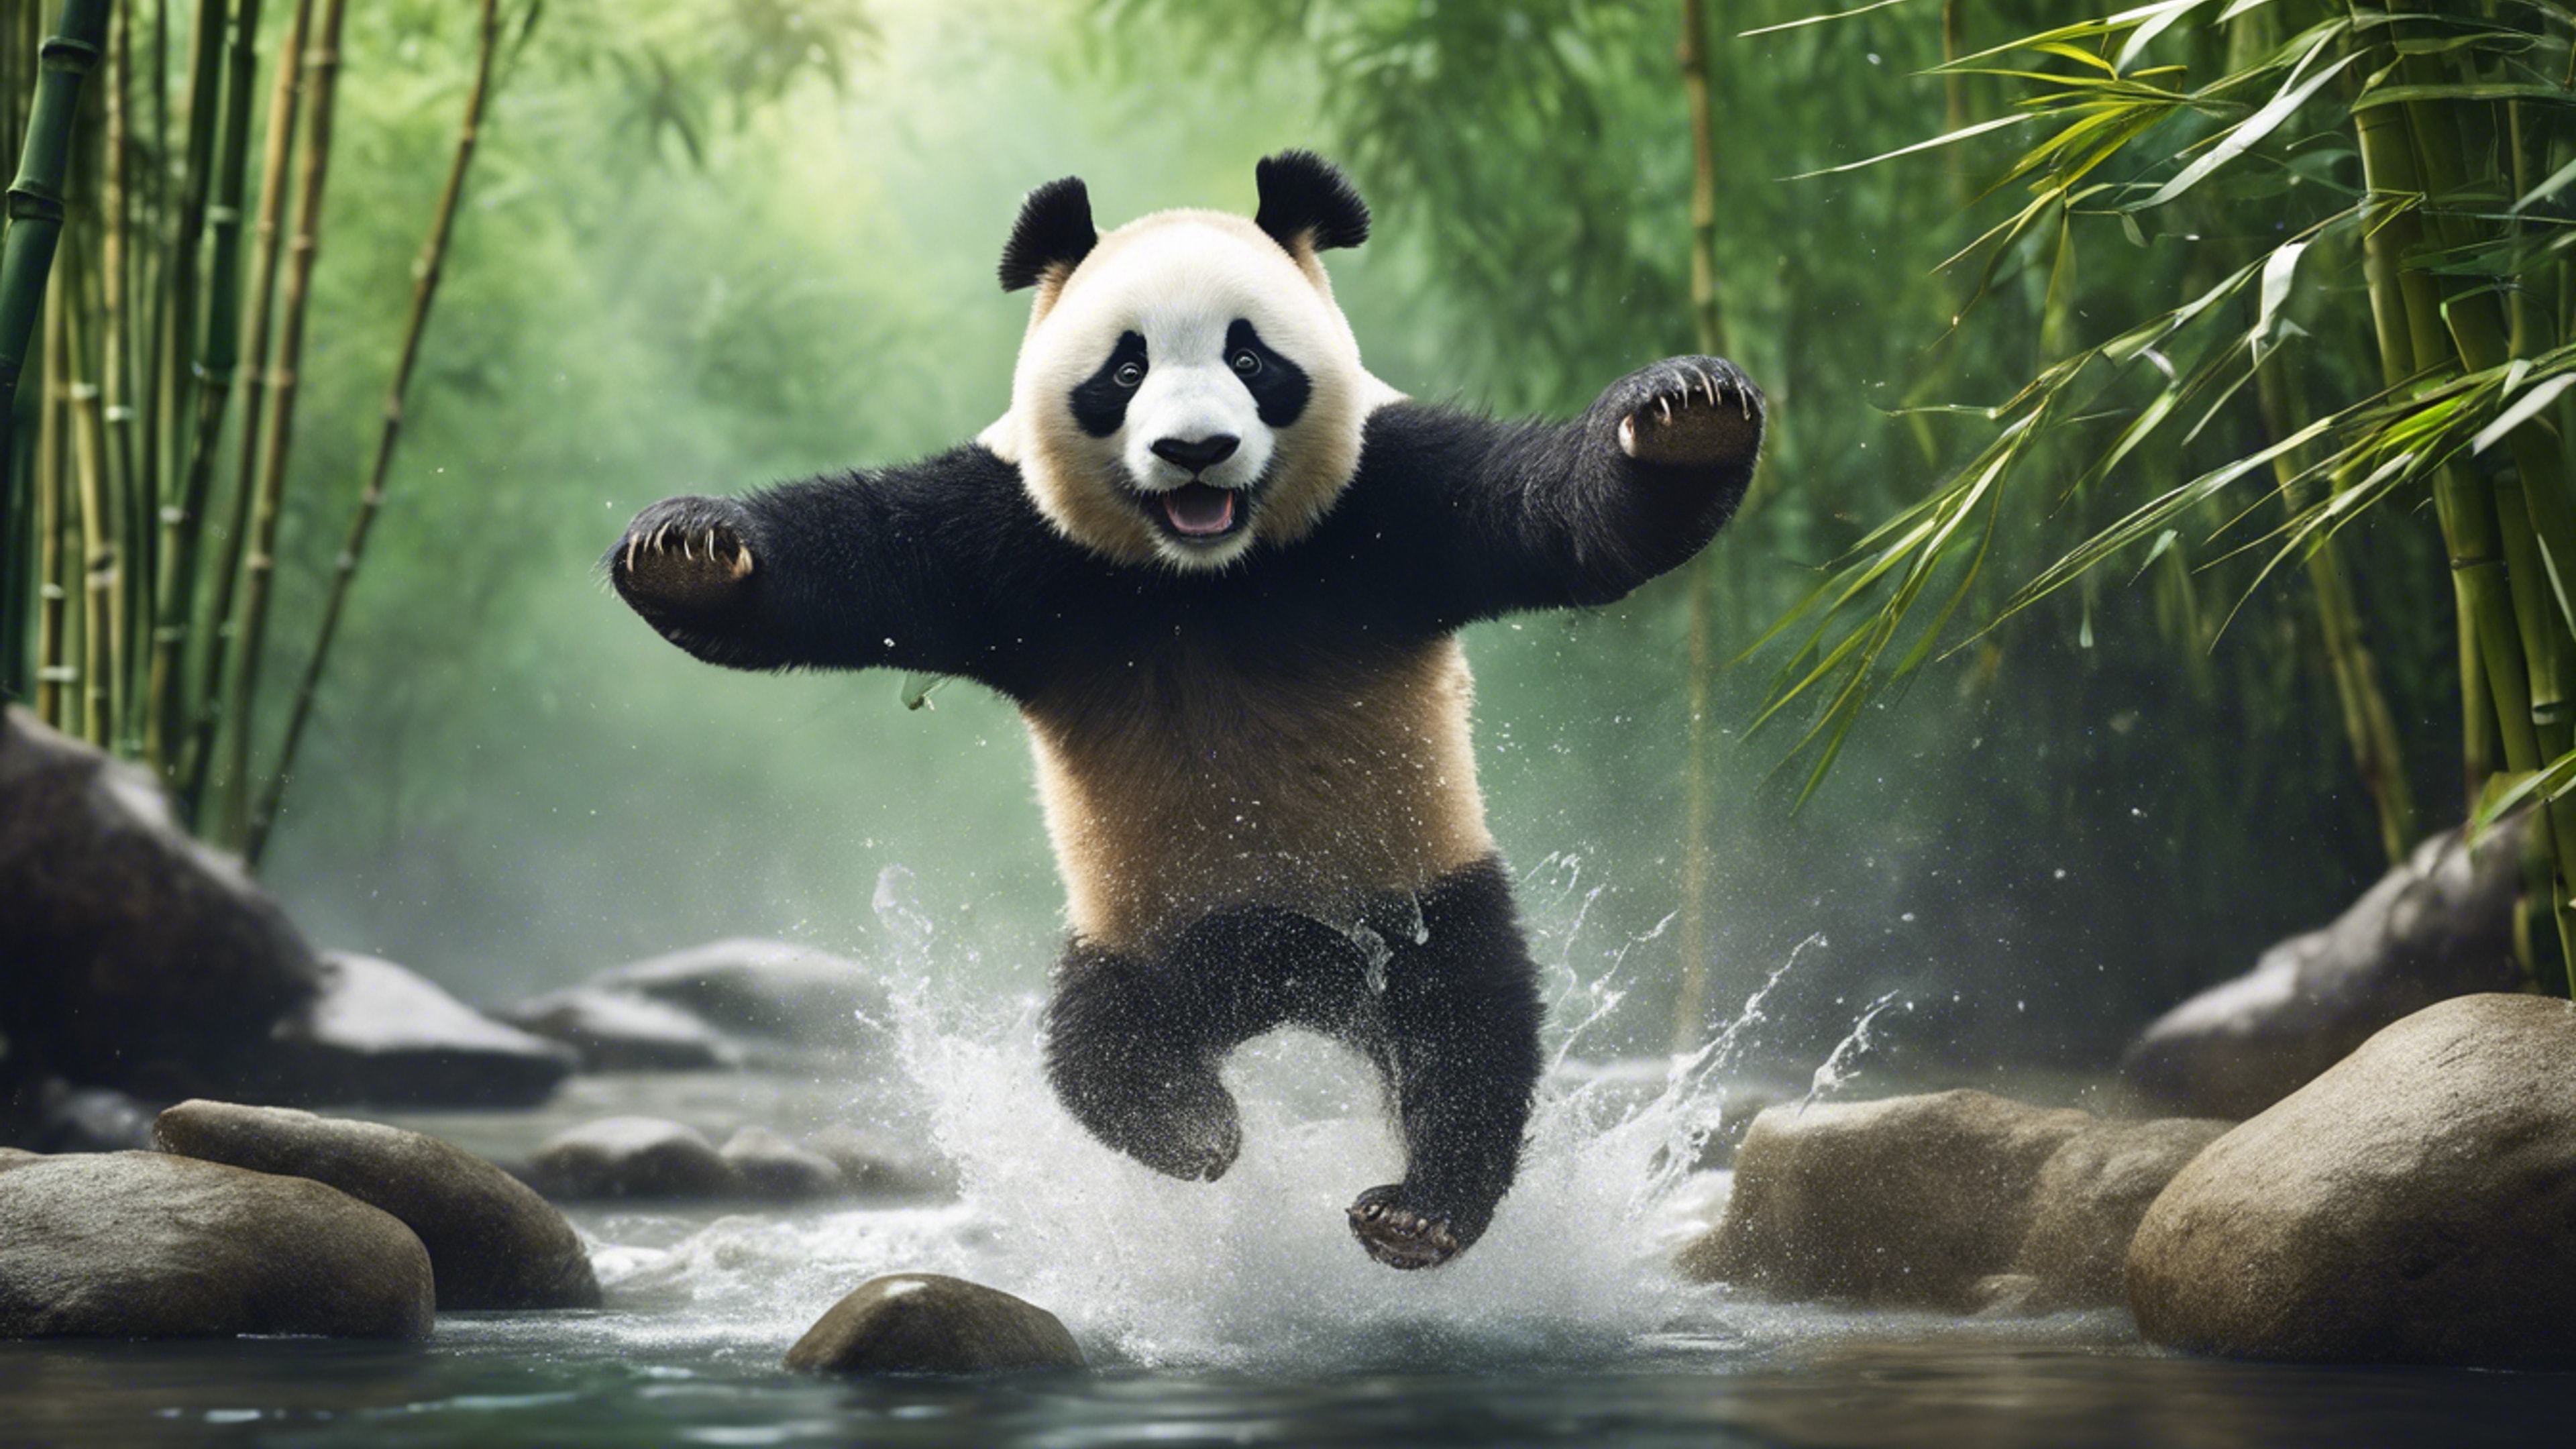 An adventurous panda leaping across a rapid creek with bamboo forests in the backdrop. טפט[317eaaa1af264f04a7c3]